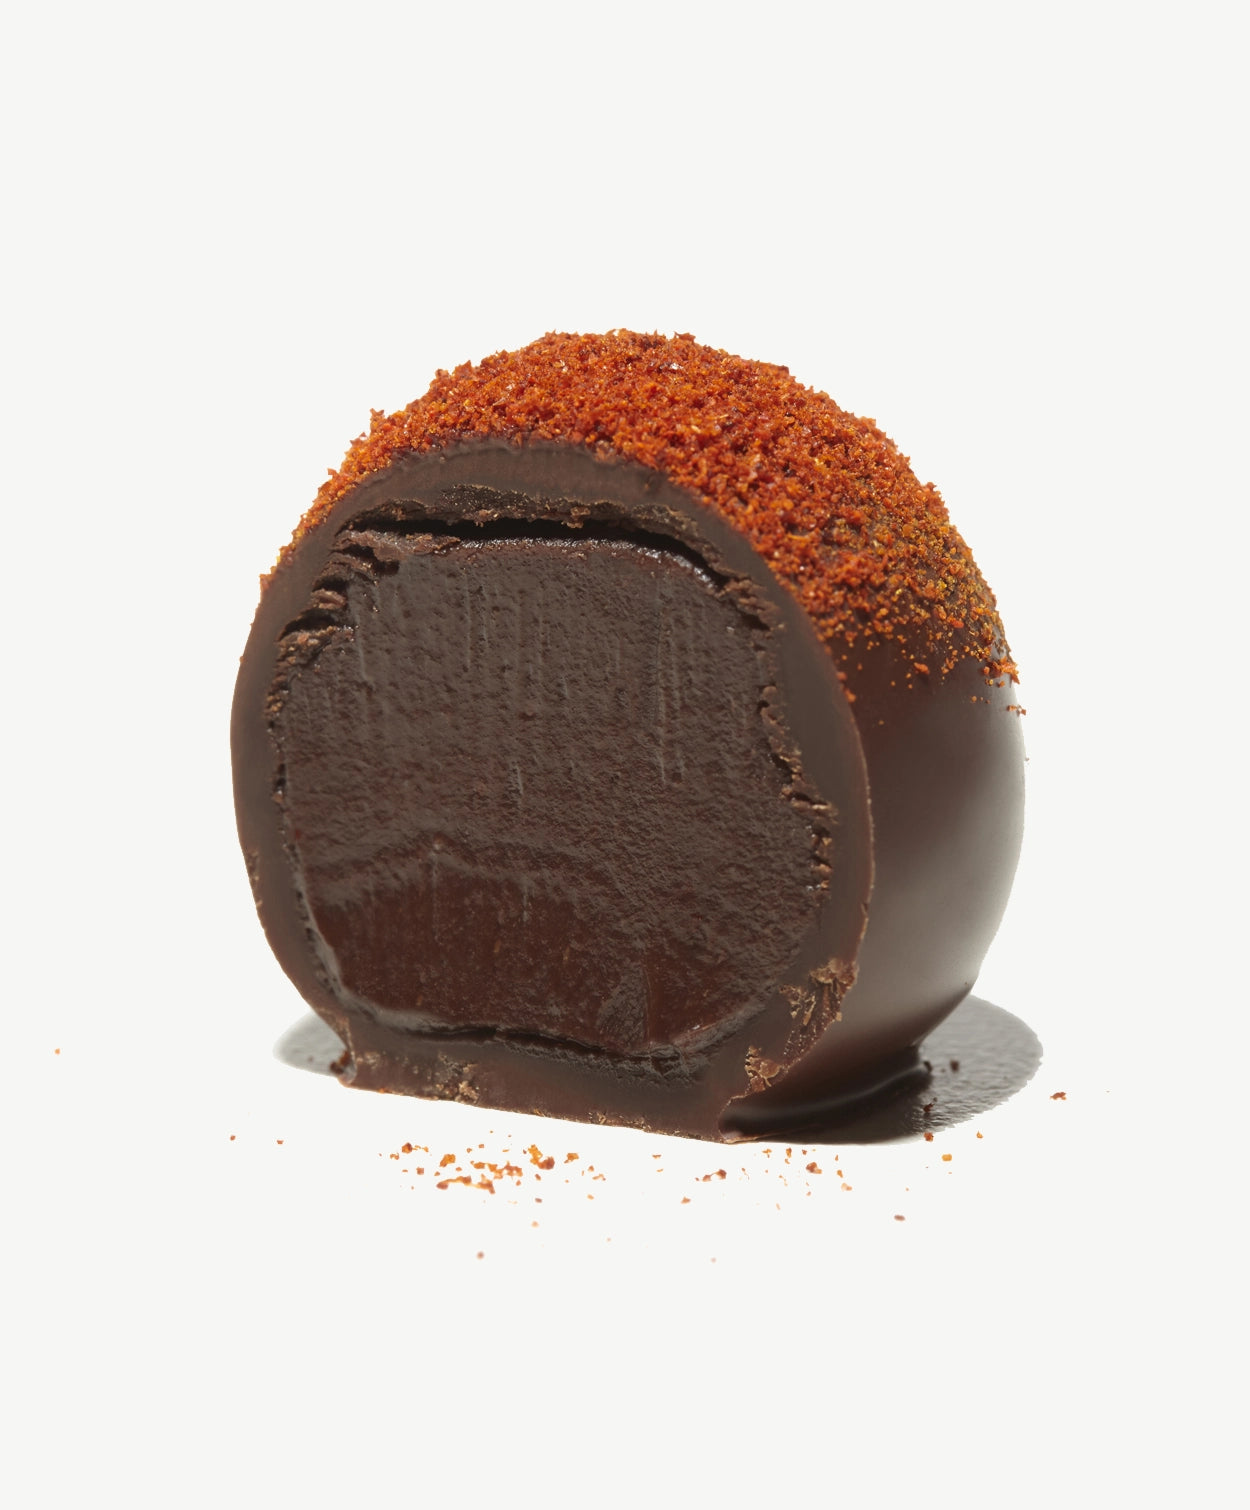 Vosges Haut-Chocolat Exotic Budapest Chocolate Truffle cut in half sprinkled with Kalocsan Paprika.